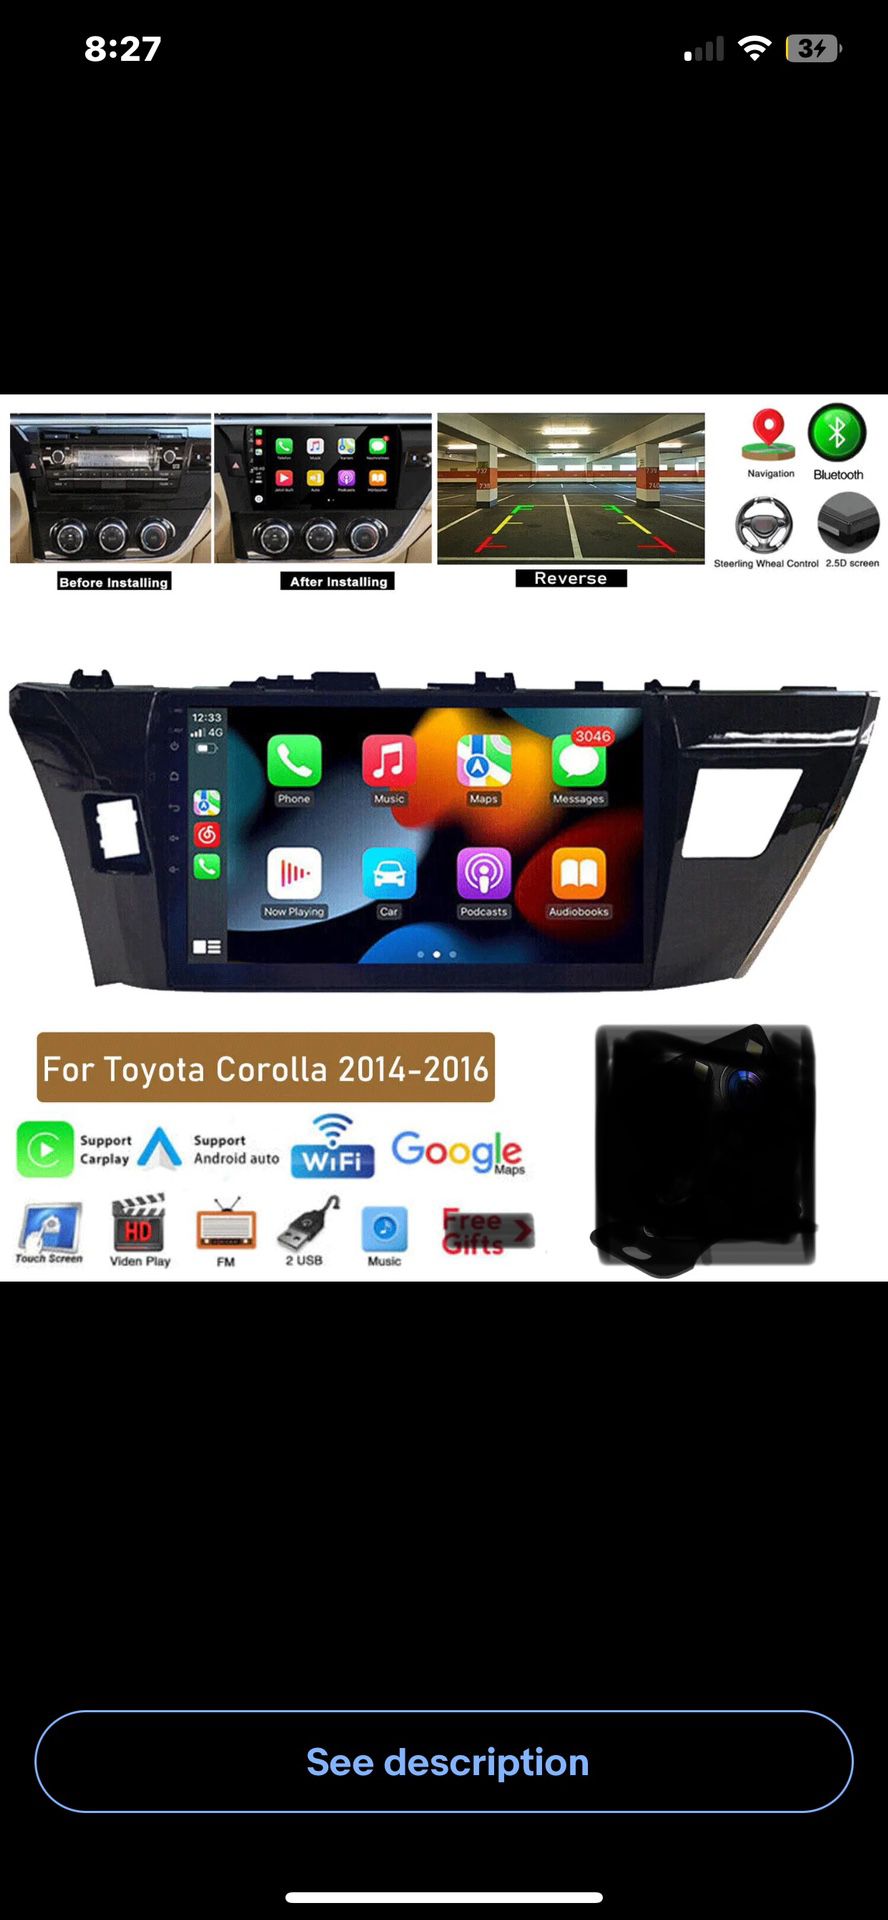 Wireless Apple Carplay for Toyota corolla 2014-2016 Car Stereo, 10” Touchscreen,GPS,wifi,FM🔥$113🔥only